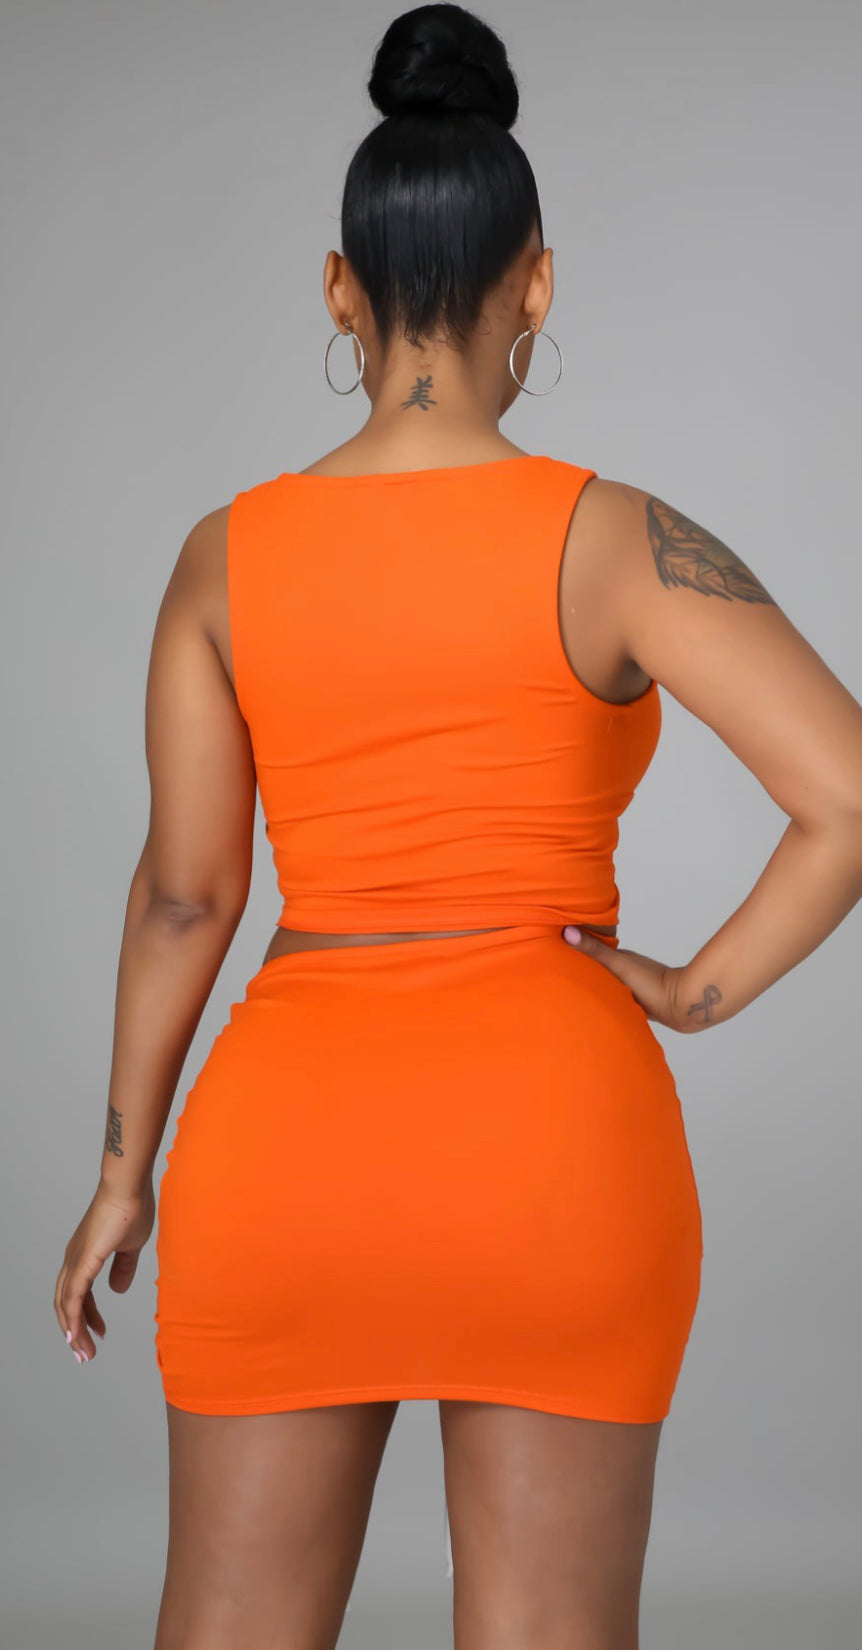 LACE UP DETAIL CROP TOP AND SKIRT SET - Orange